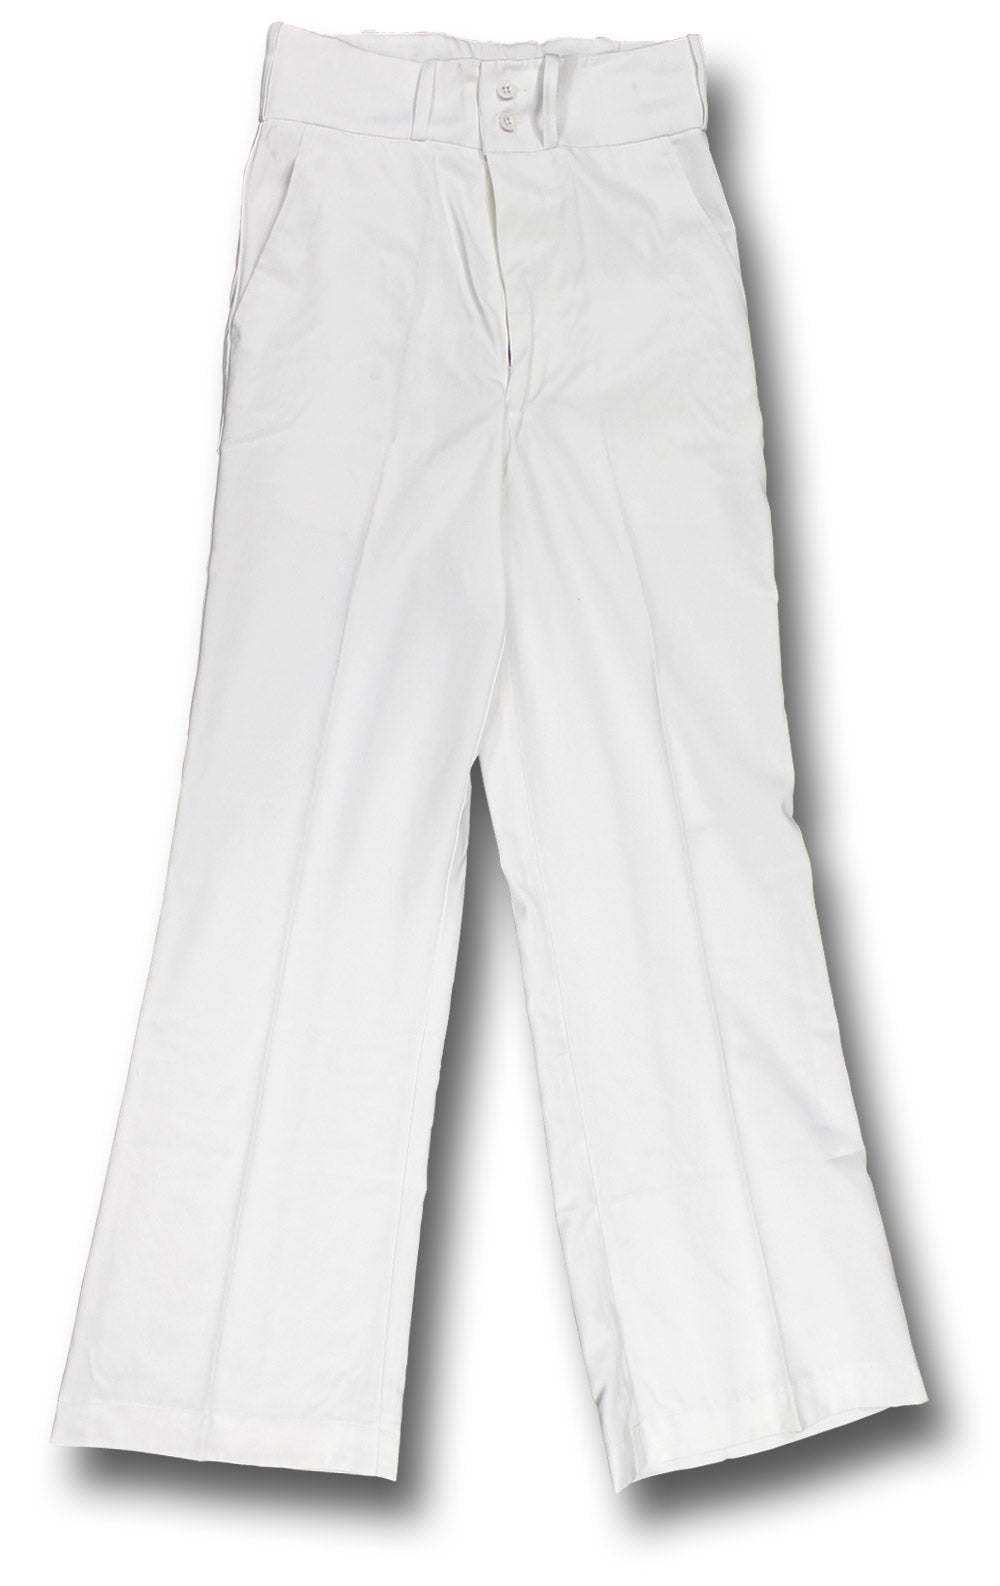 NEW WHITE BELLBOTTOM TROUSERS